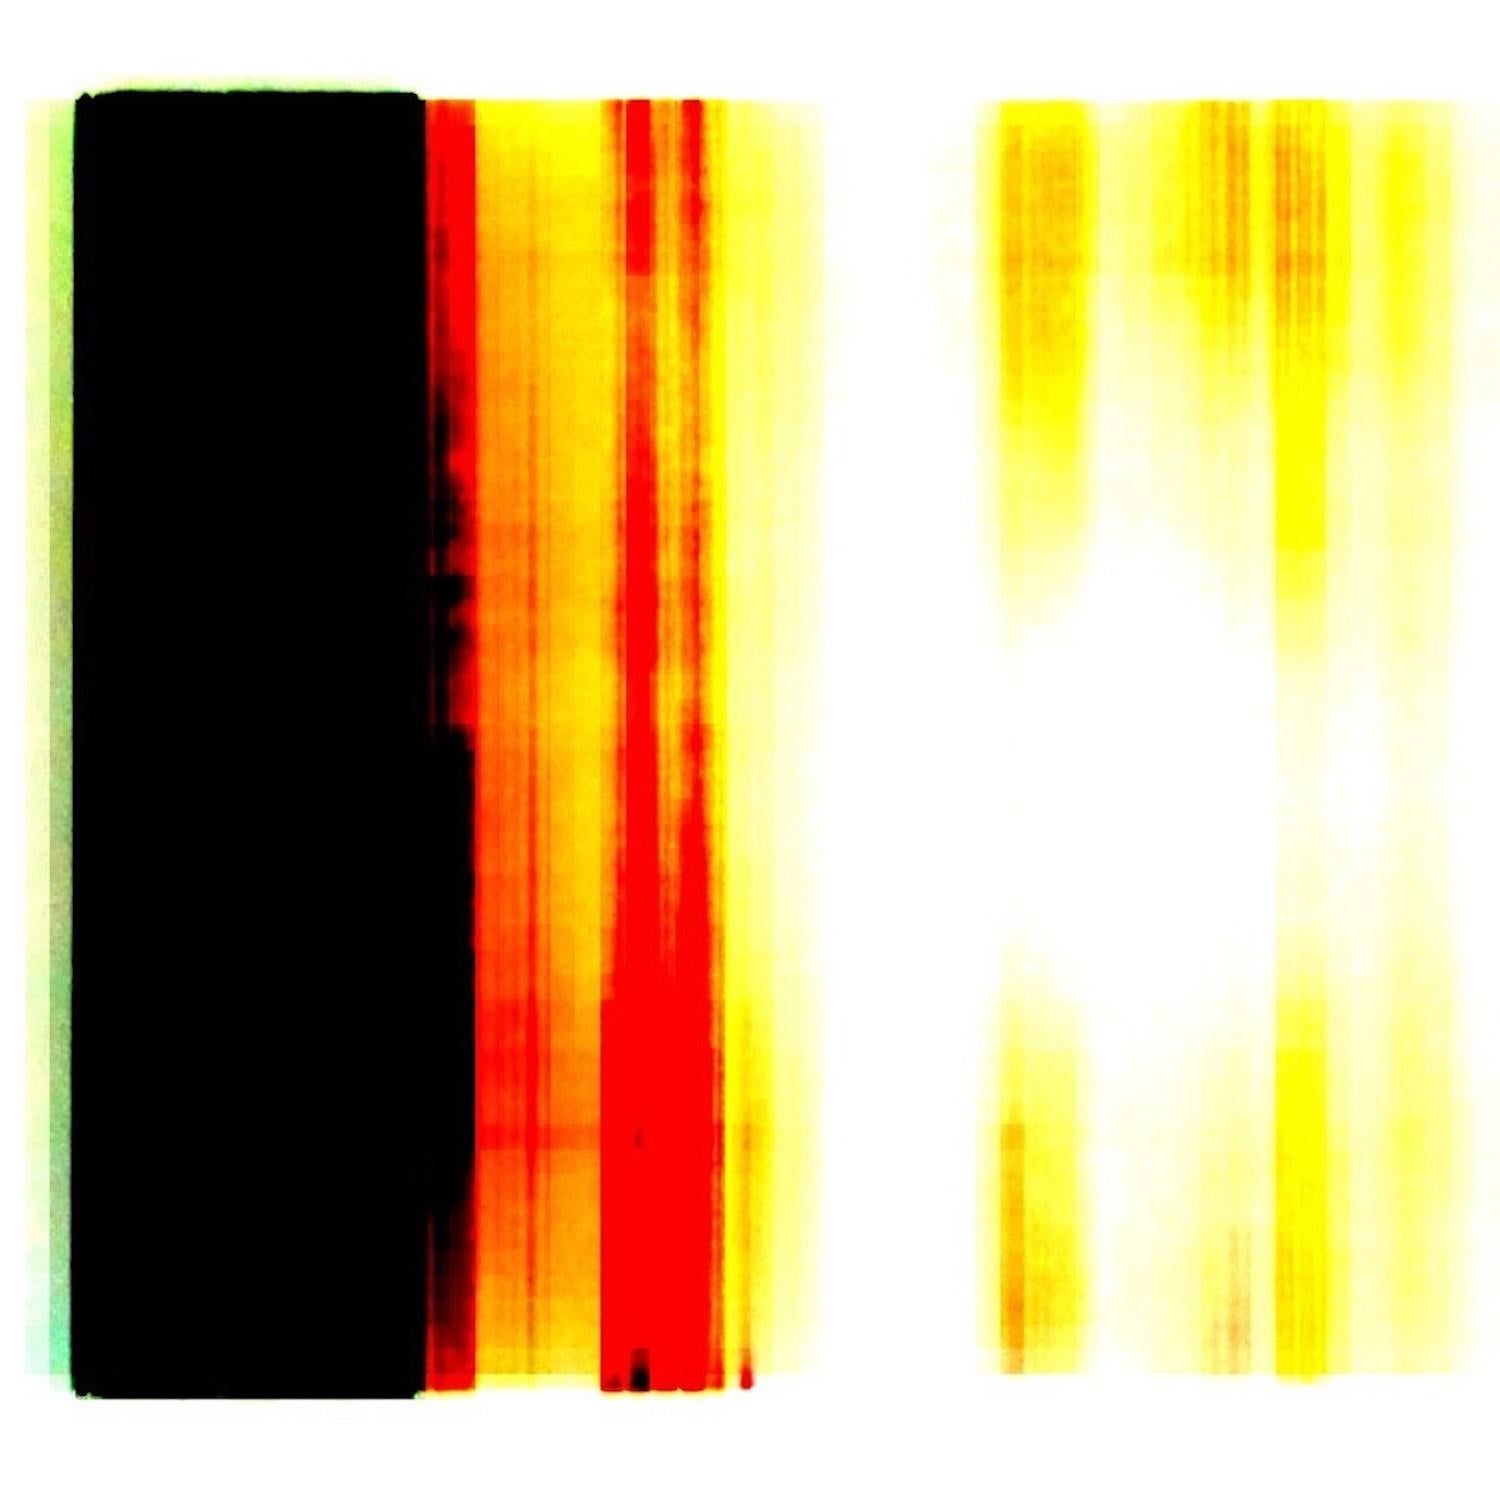 "Broken Television 301", abstract, black, red, yellow, photo, digital print - Print by Patty deGrandpre